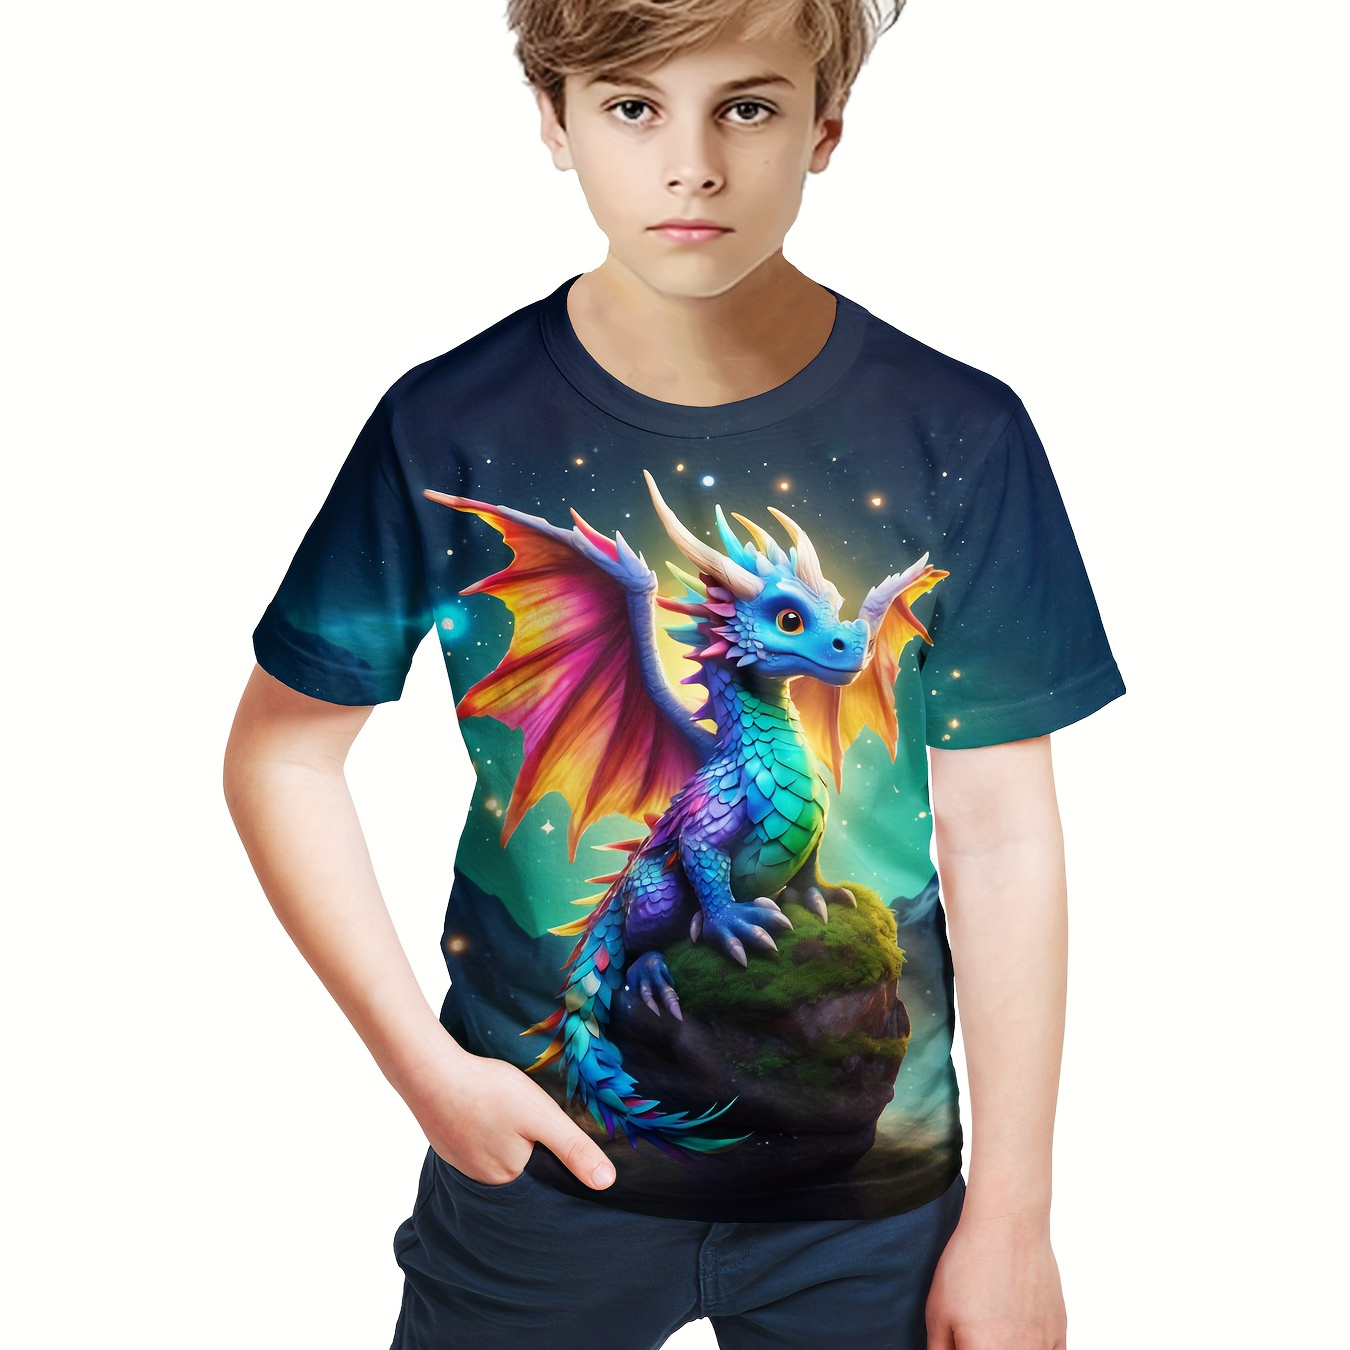 

Colorful Cool Flying Dragon 3d Print Boy's Leisure Sports T-shirt - Comfortable Summer Outdoor Clothing